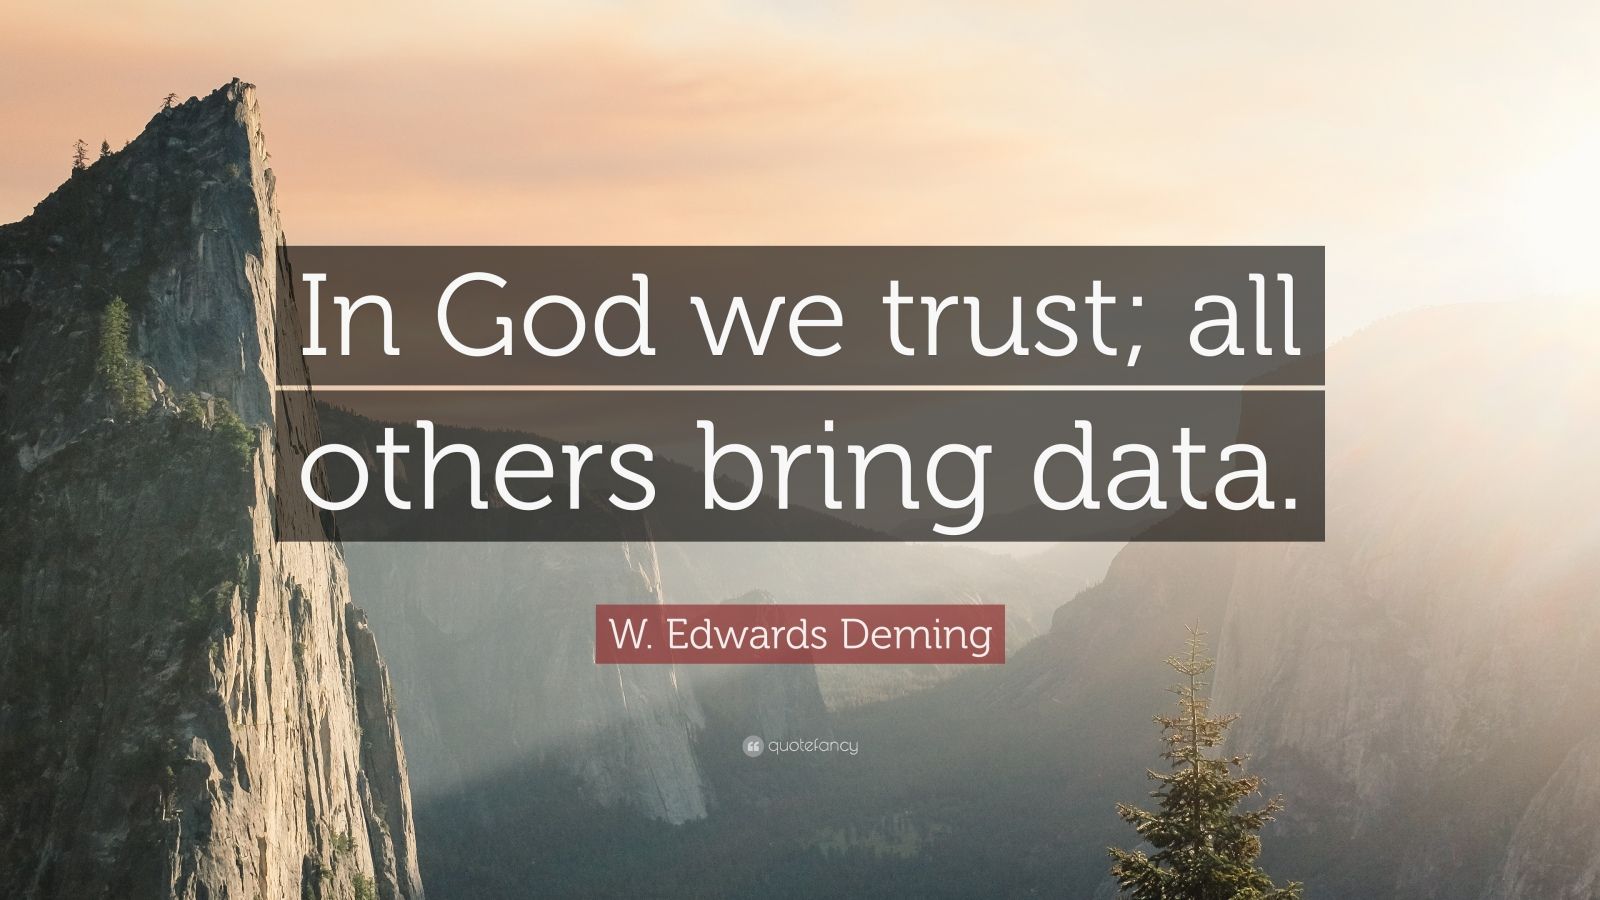 W. Edwards Deming Quote: “In God we trust; all others bring data.”